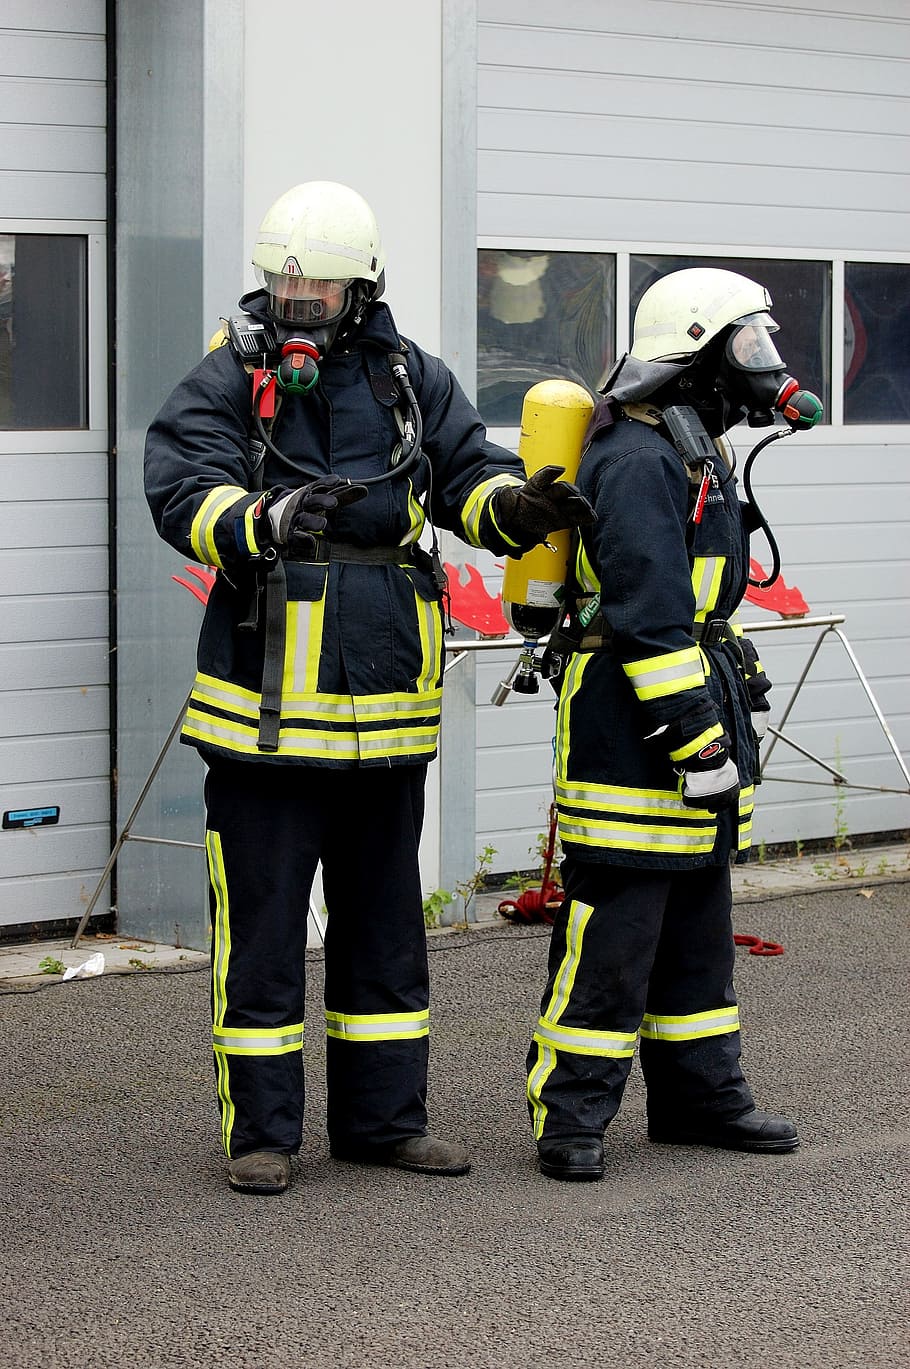 fire, firefighters, feuerloeschuebung, breathing apparatus, respiratory protection, occupation, firefighter, helmet, protection, security